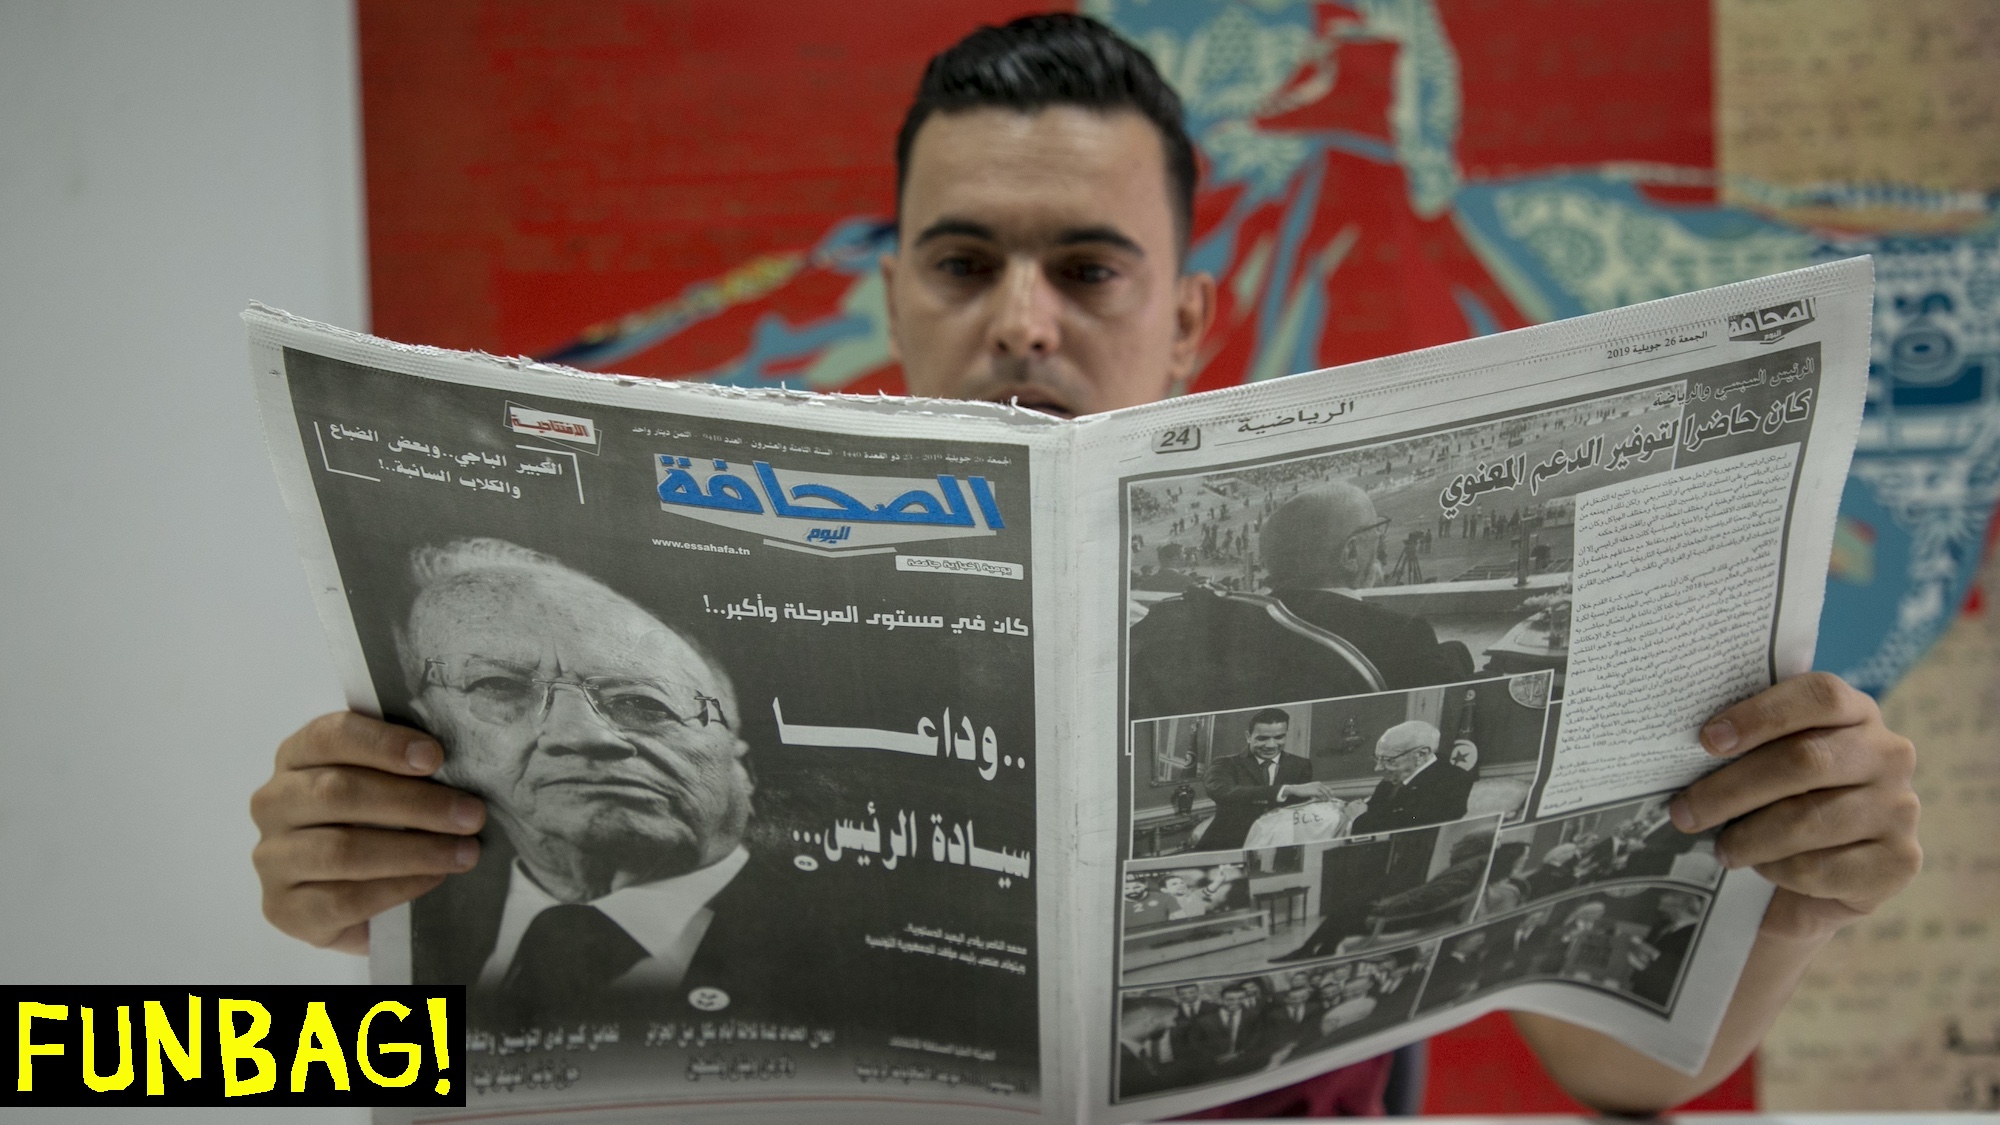 TUNIS, TUNISIA - JULY 26 : A man reads a newspaper with the death of Tunisian President Beji Caid Essebsi (92) on the headline in the country in Tunis, Tunisia on July 26, 2019. (Photo by Yassine Gaidi/Anadolu Agency via Getty Images)